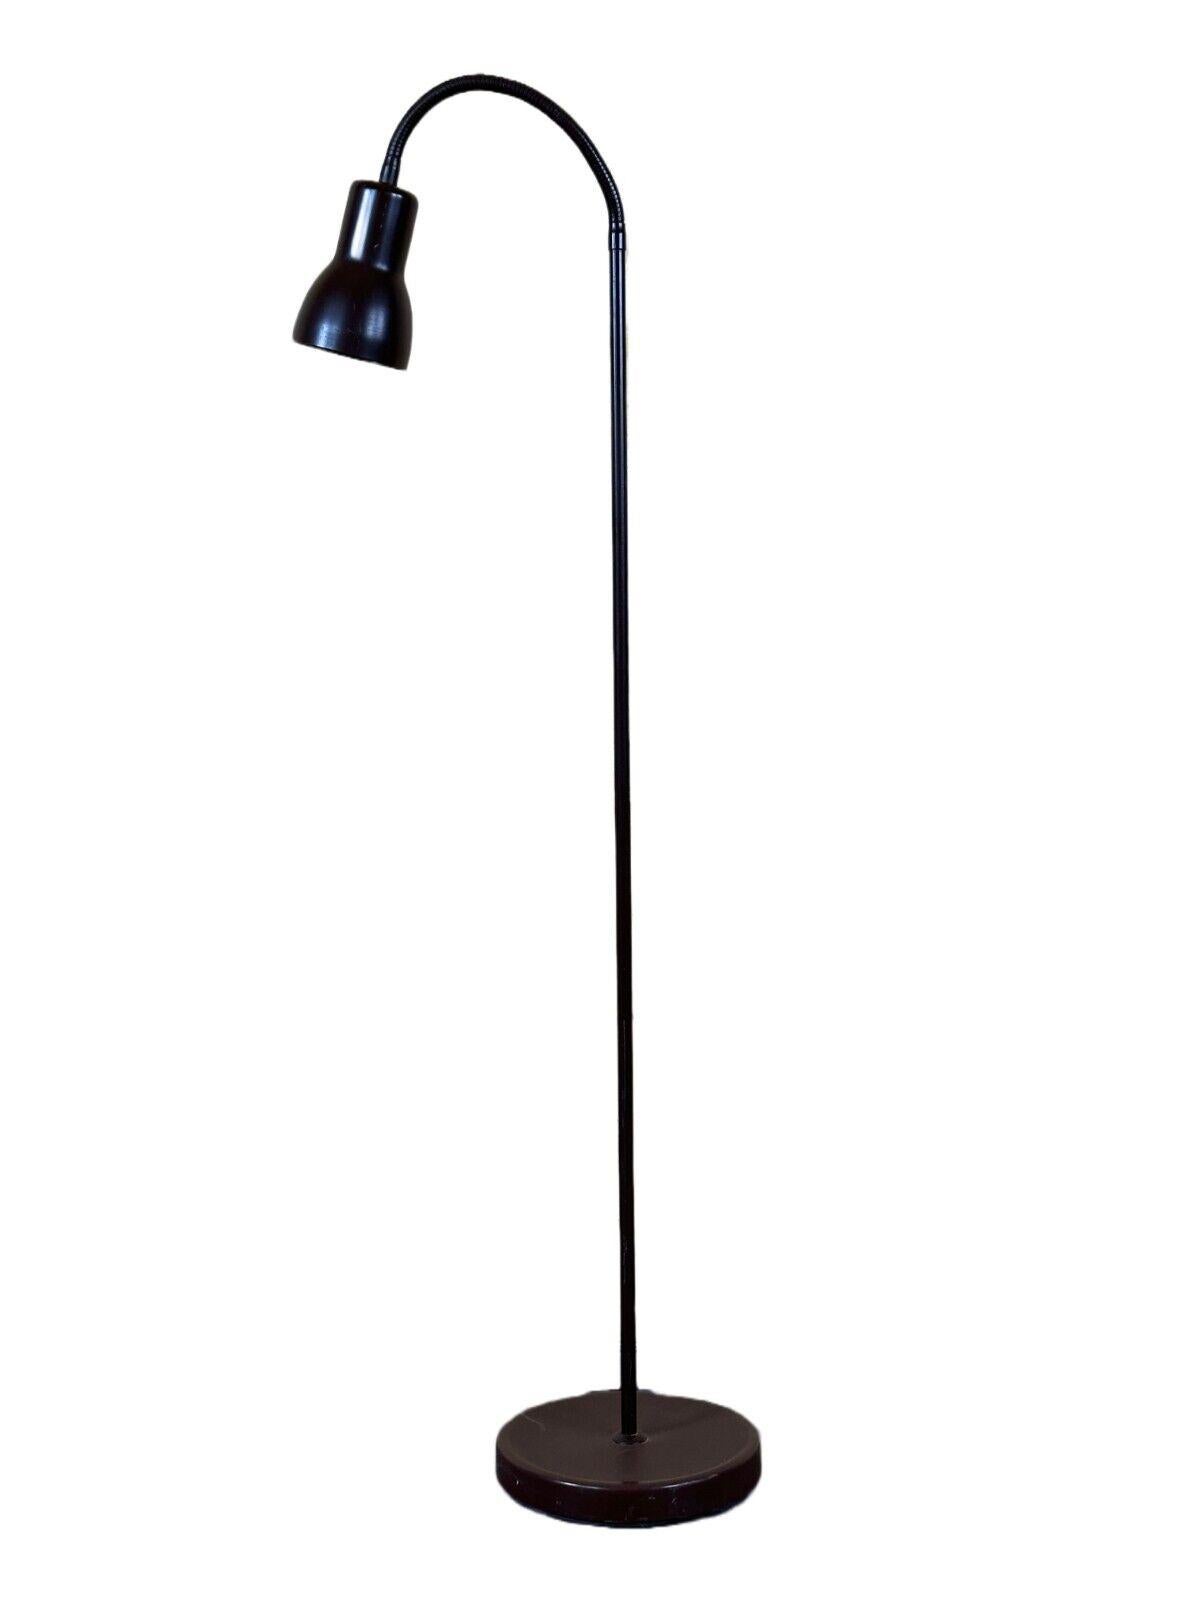 60s 70s floor lamp space age design metal

Object: floor lamp

Manufacturer: EH

Condition: good - vintage

Age: around 1960-1970

Dimensions:

Width = 38cm
Depth = 22cm
Height = 113cm

Material: metal

Other notes:

E27 socket

The pictures serve